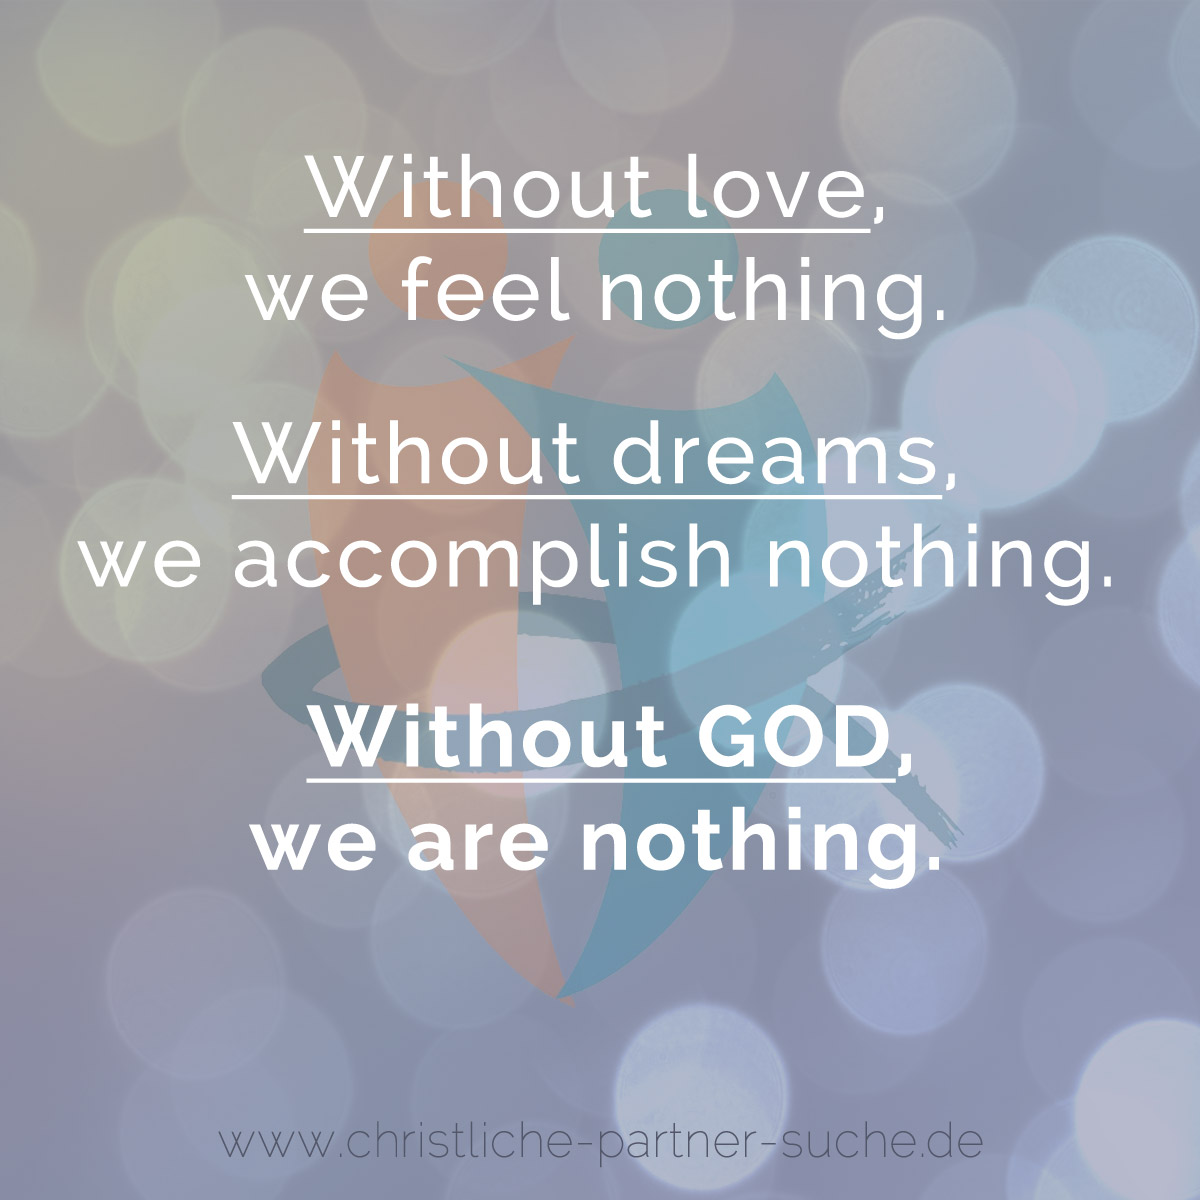 Without love, we feel nothing.